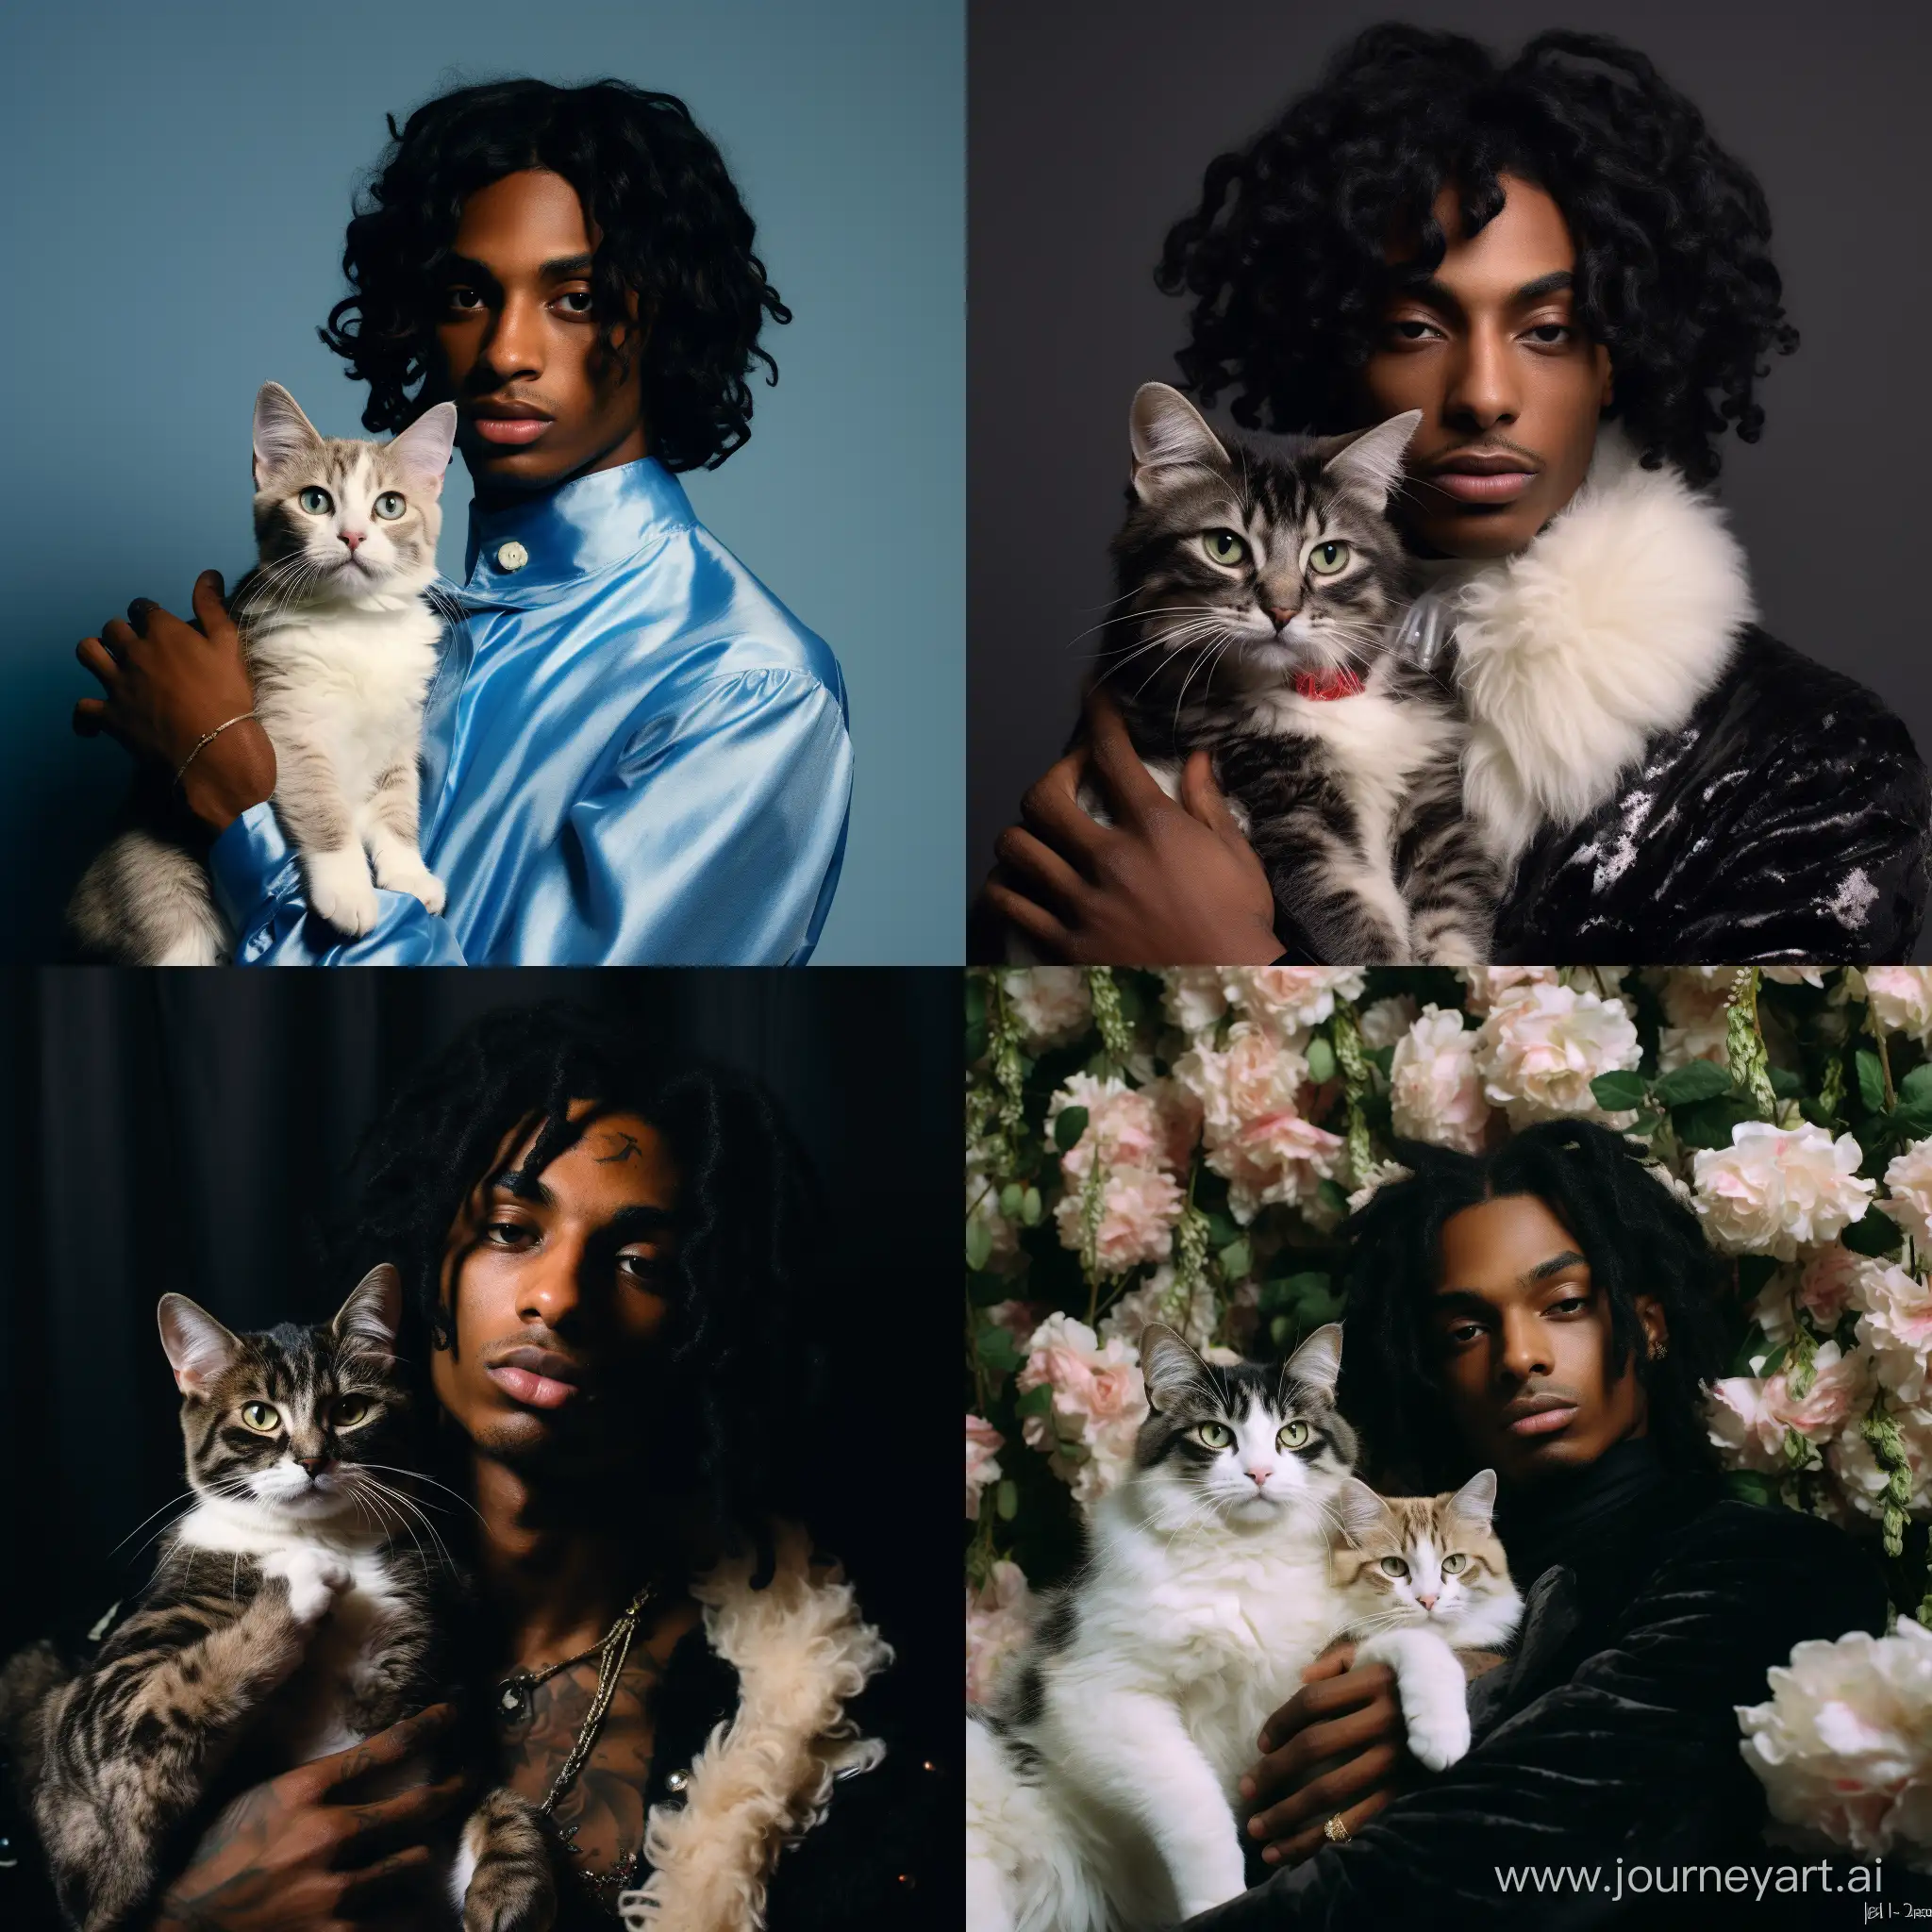 Playboi-Cartis-Exclusive-Magazine-Cover-Pose-with-Stylish-Cat